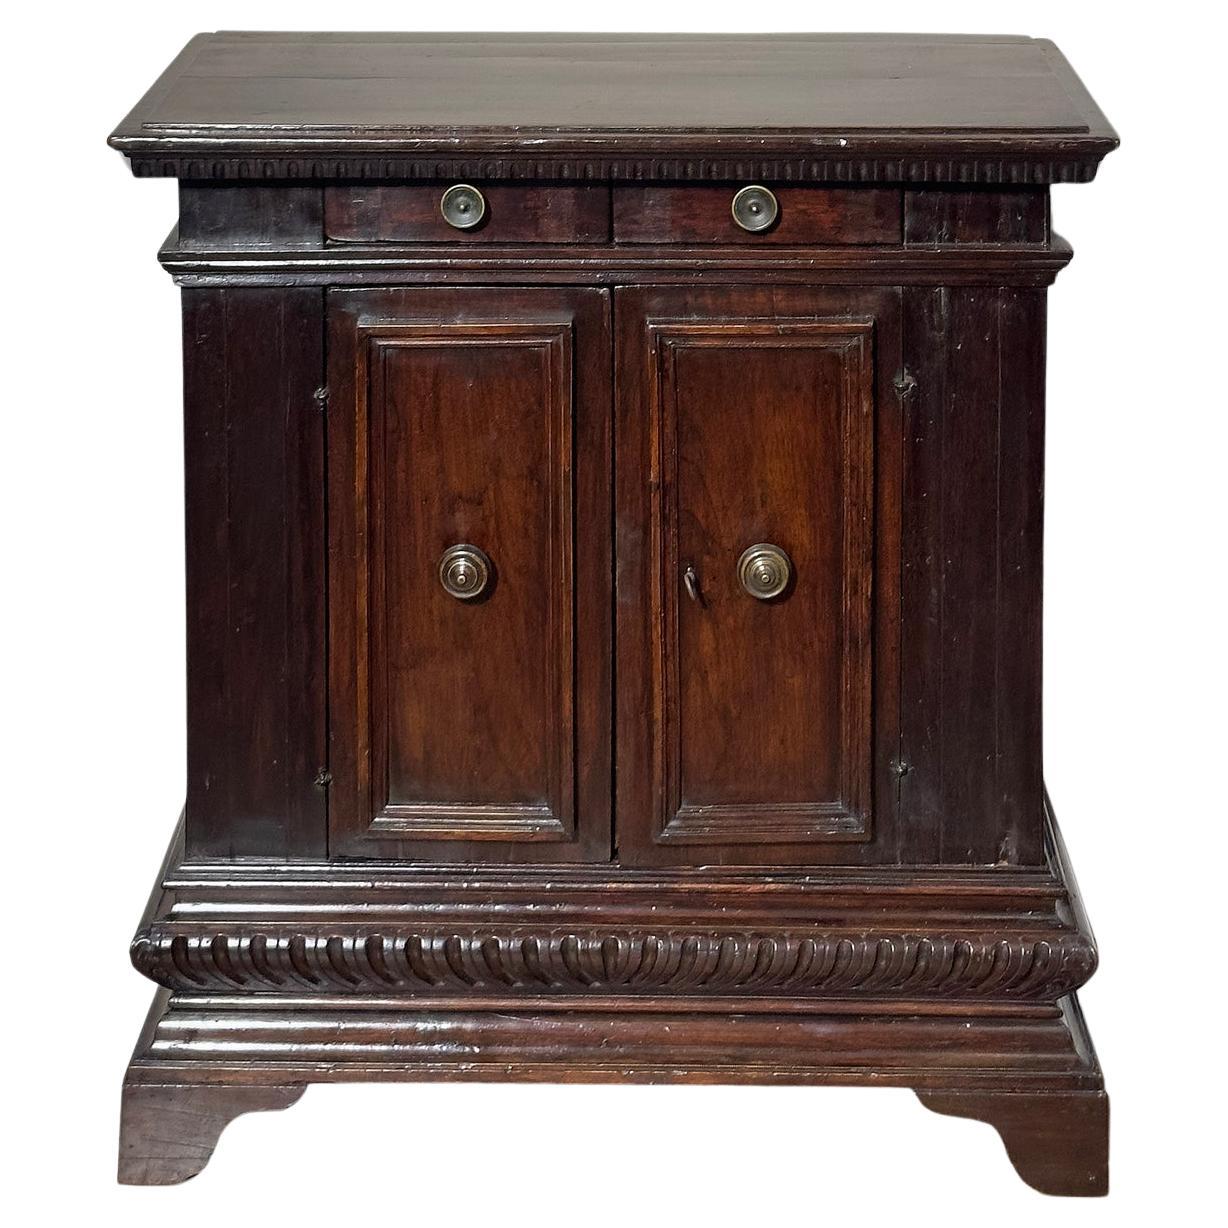 16th CENTURY RENAISSANCE SMALL SIDEBOARD IN SOLID WALNUT